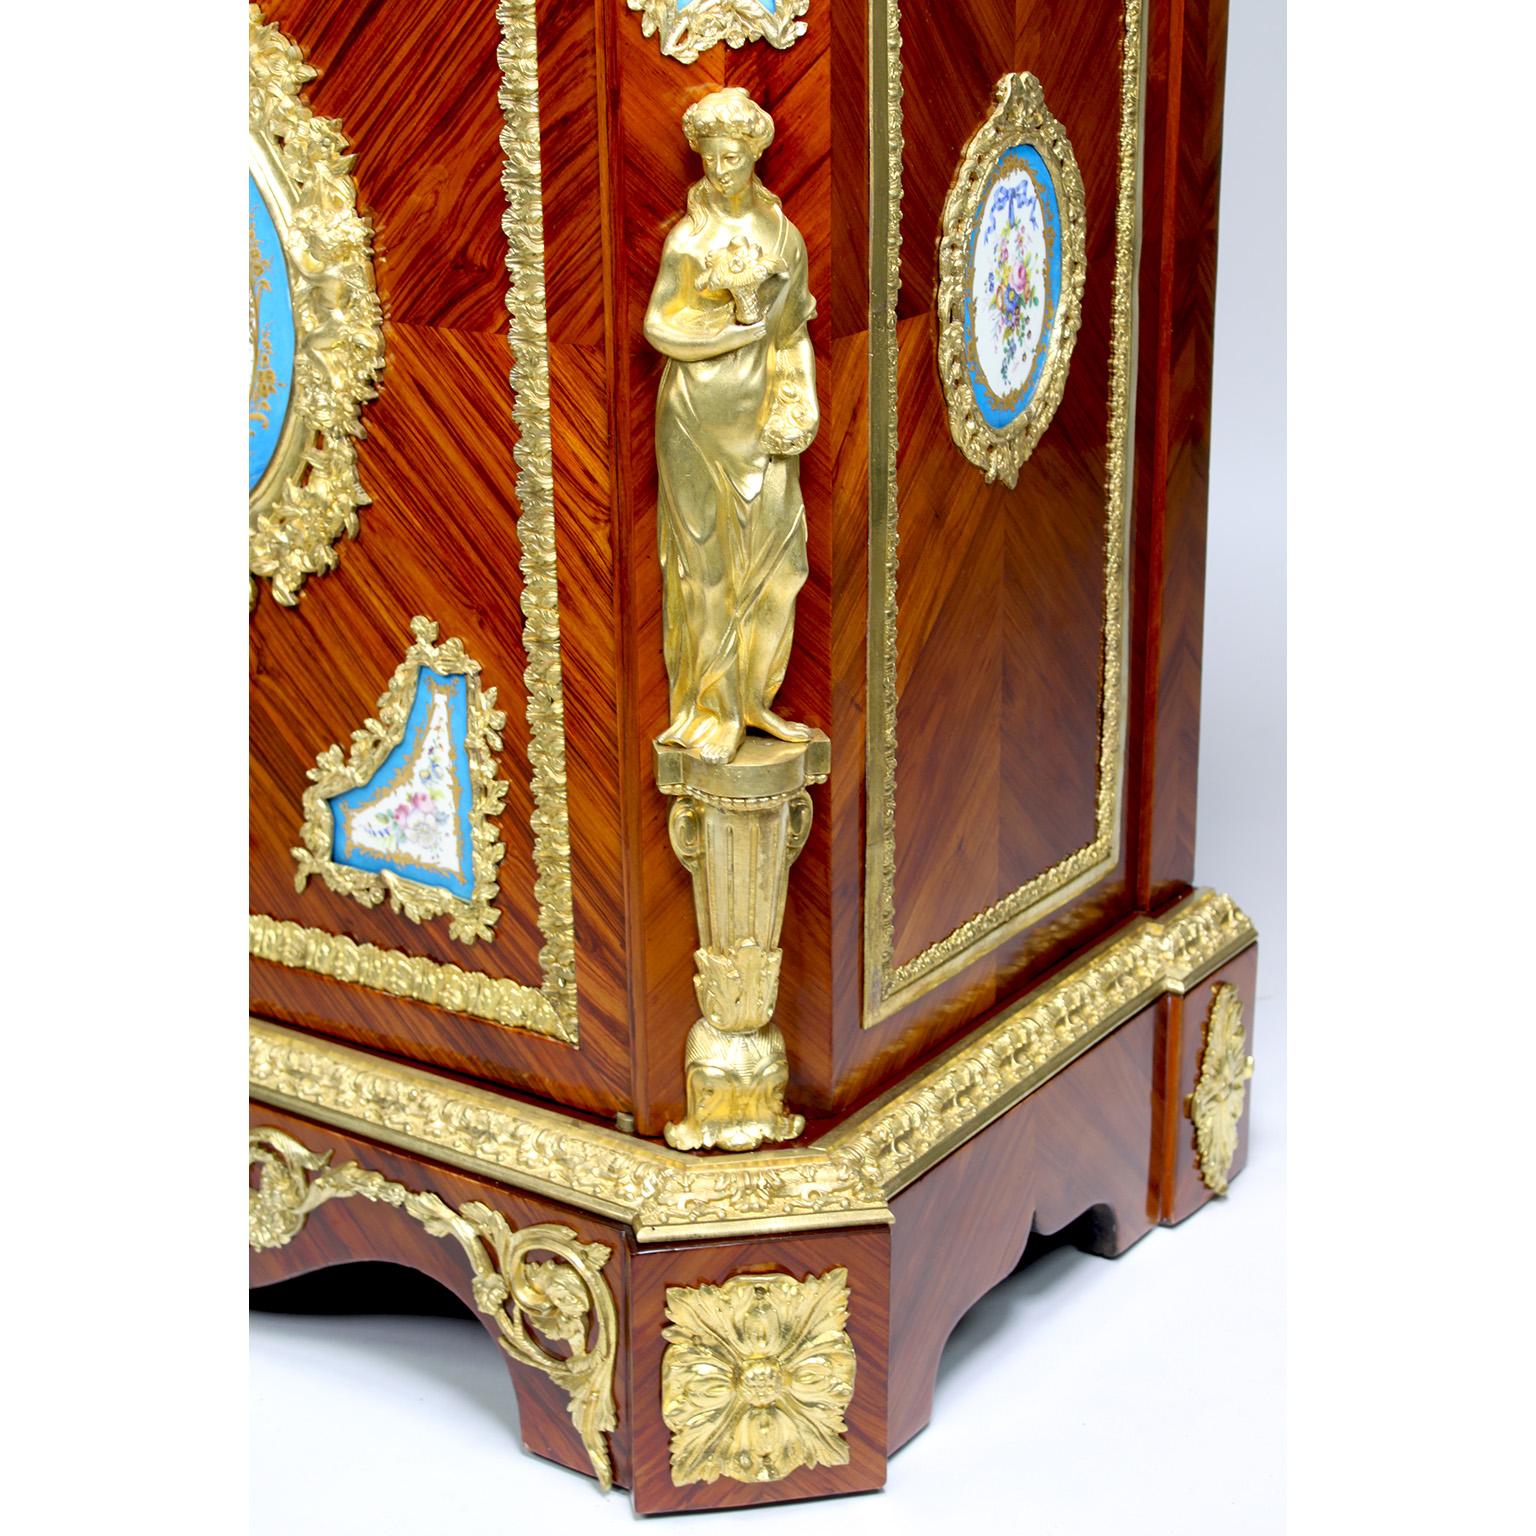 French Napoleon III Ormolu & Porcelain Mounted Cabinet Meuble D'Appui by Befort For Sale 3